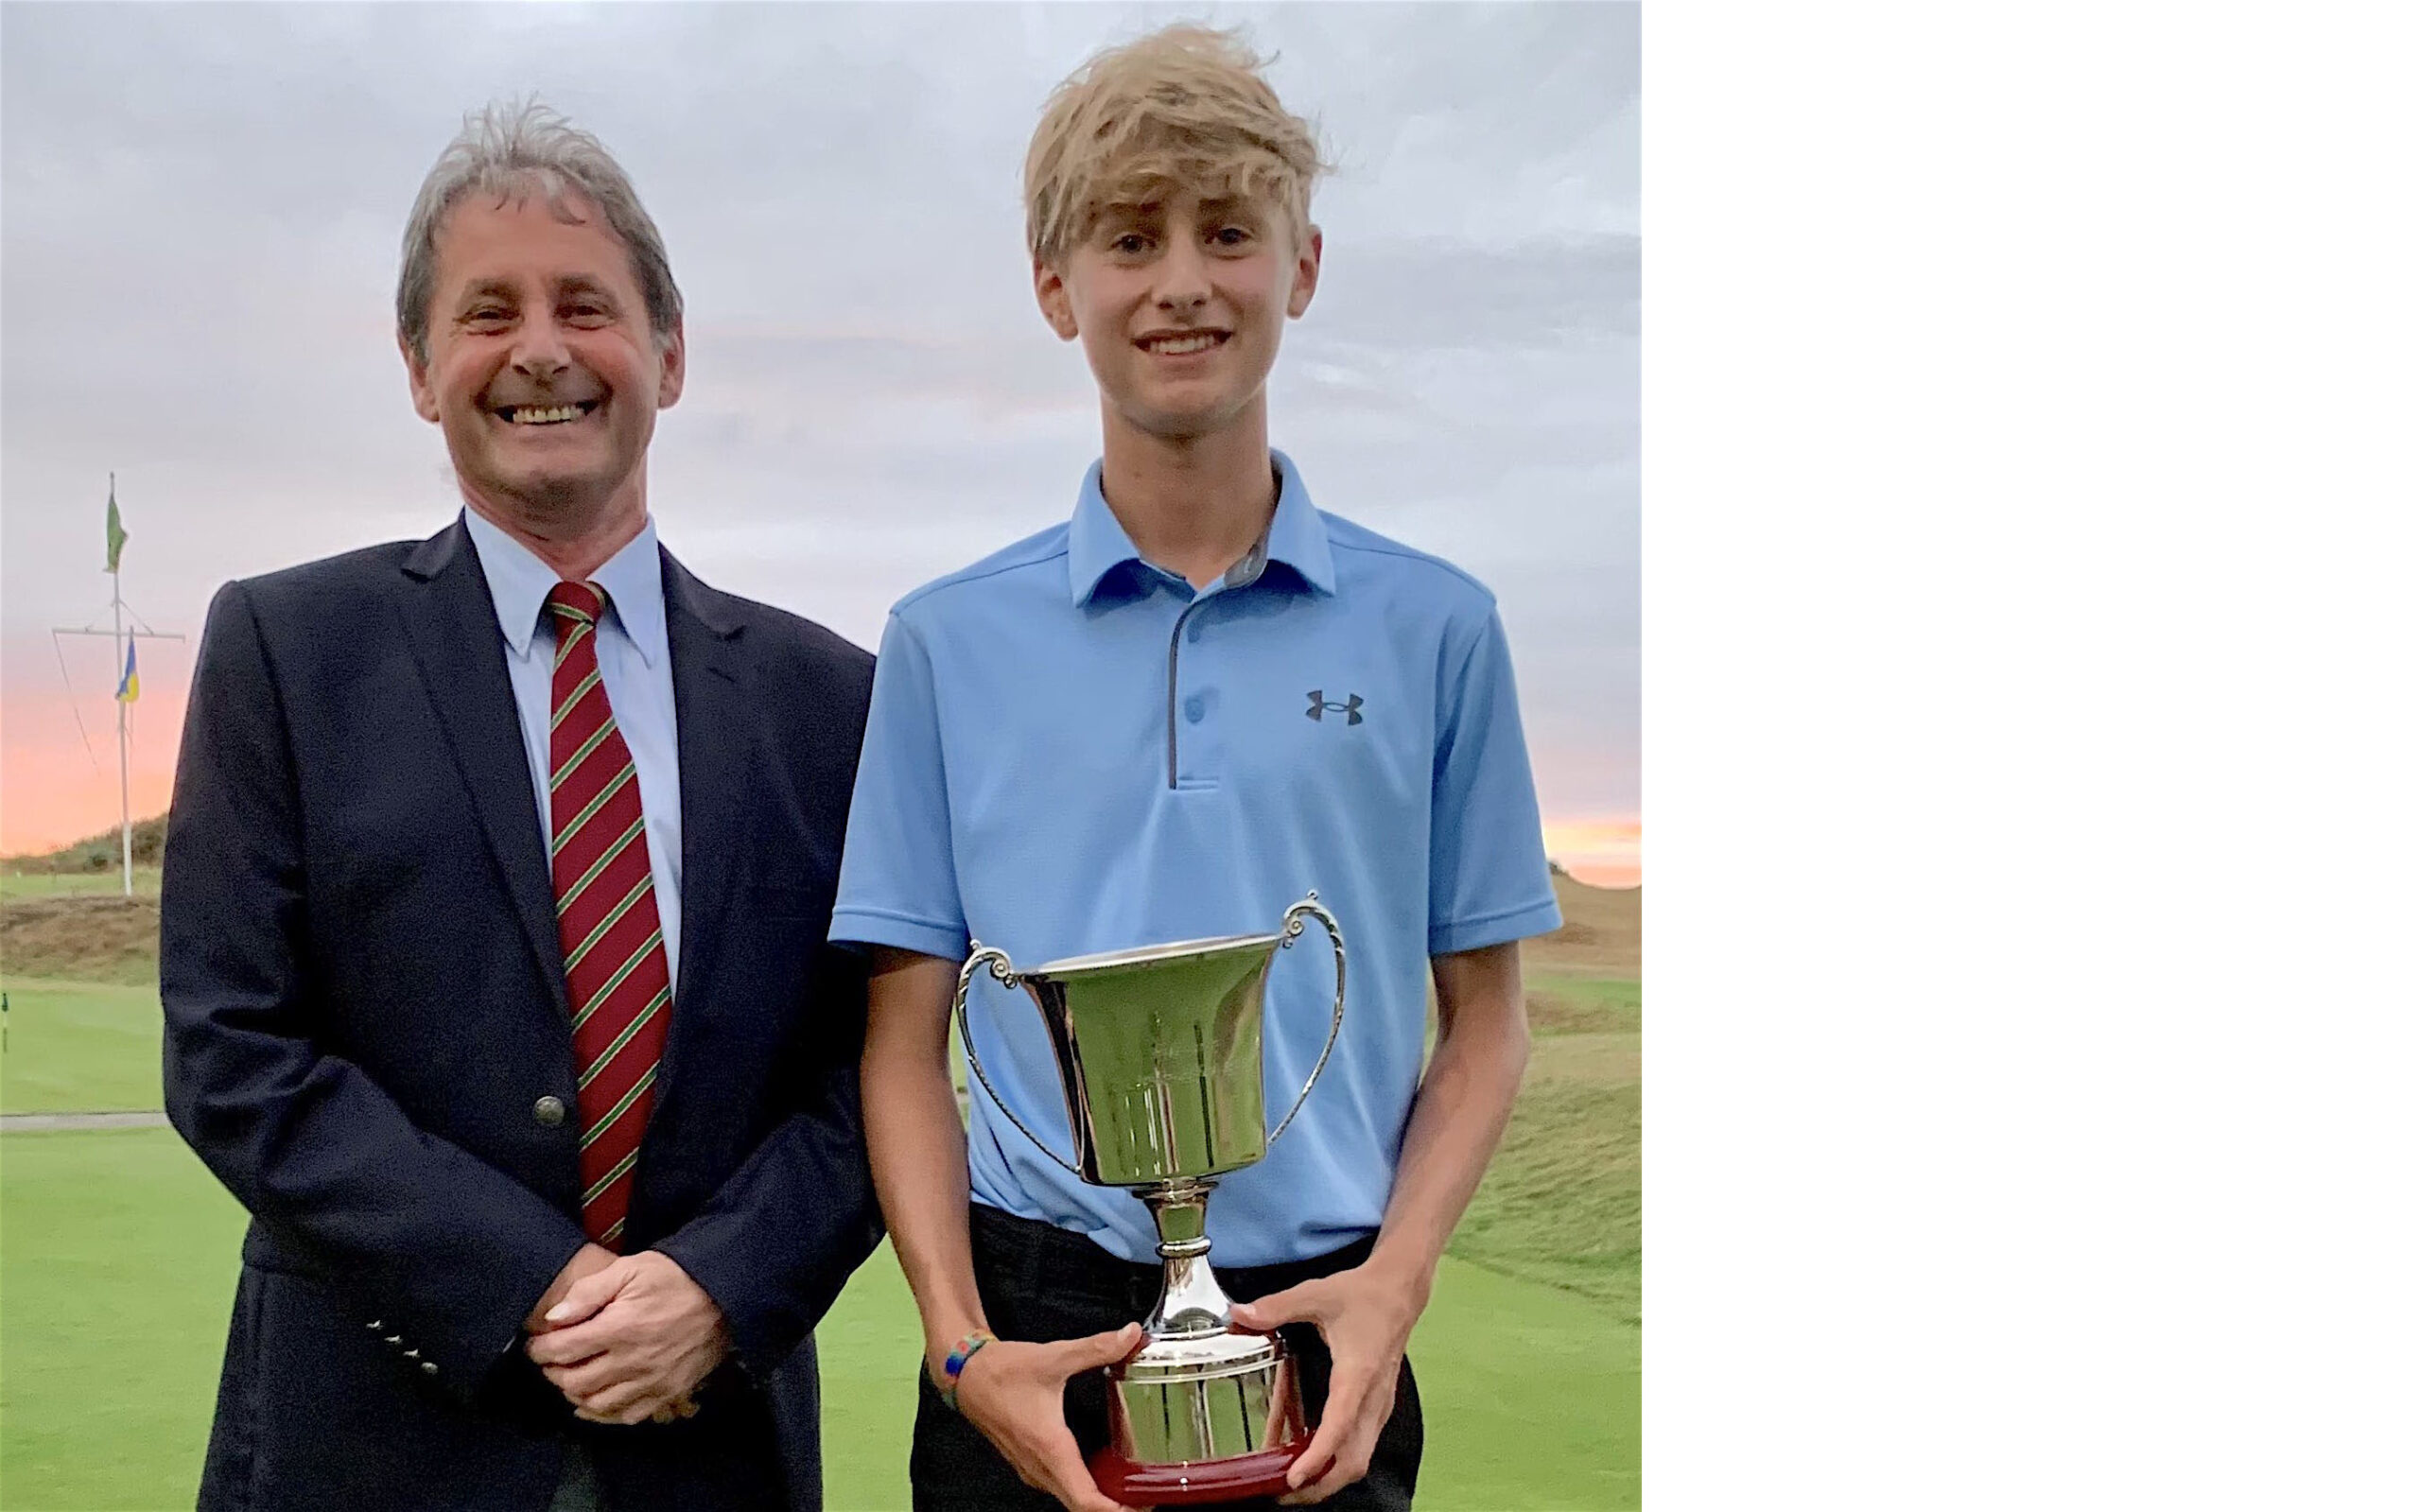 Freddie Turnell is presented with the South West U-18s title by Robin Griffiths of the Seniors Society (the organisation that started the event)